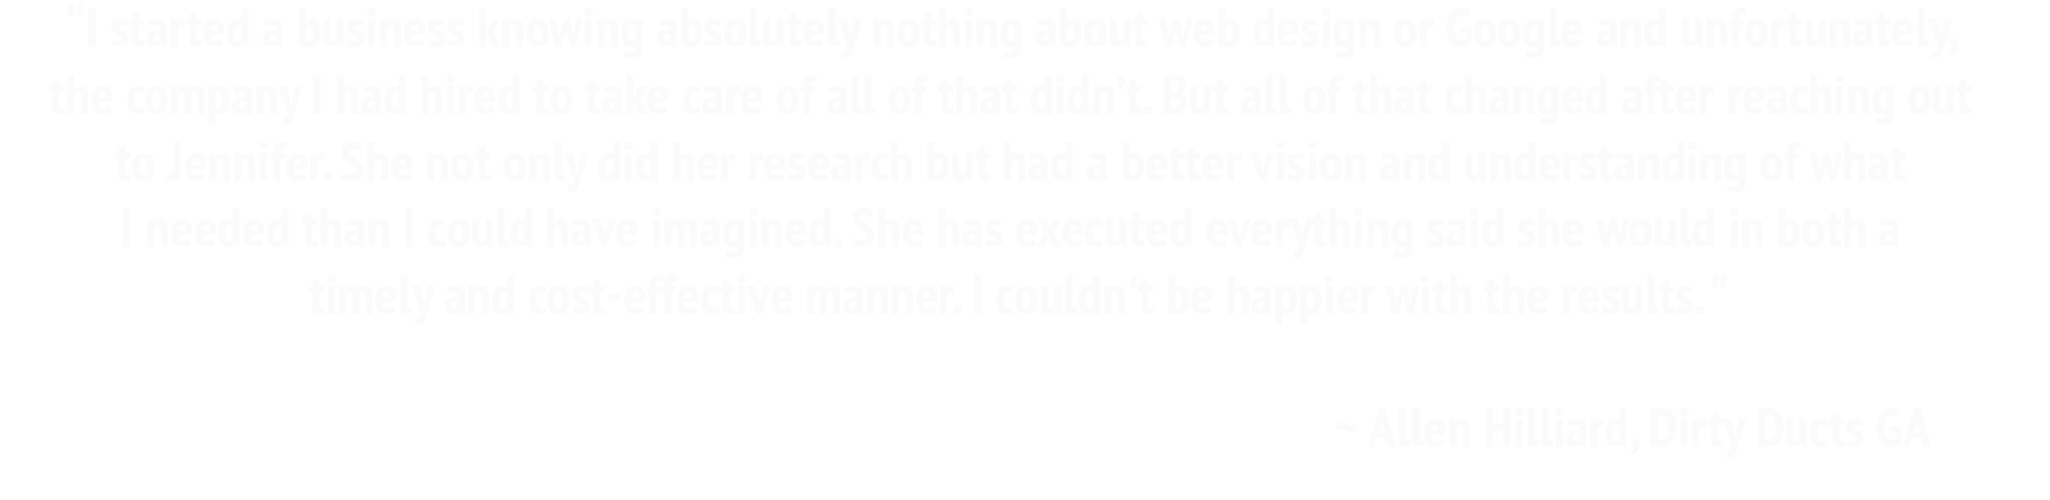 I started a business knowing absolutely nothing about web design or Google and unfortunately, the company I had hired to take care of all of that didn’t. But all of that changed after reaching out to Jennifer. She not only did her research but had a better vision and understanding of what I needed than I could have imagined. She has executed everything said she would in both a timely and cost-effective manner. I couldn't be happier with the results. ~Allen Hilliard, Dirty Ducts GA